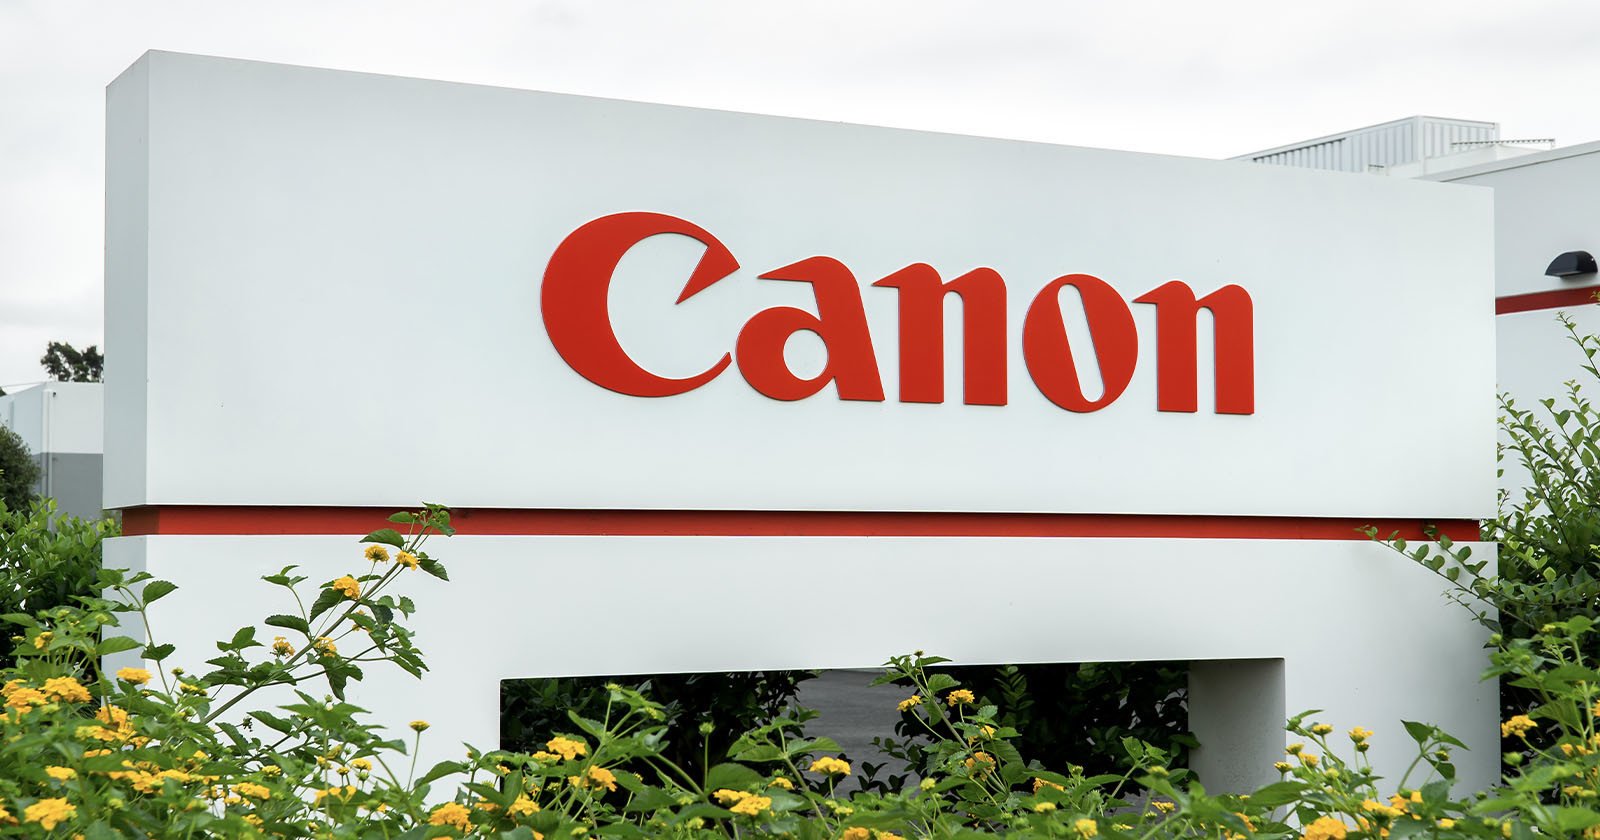 Canon is Riding a Rising Market As Cameras Sell Well